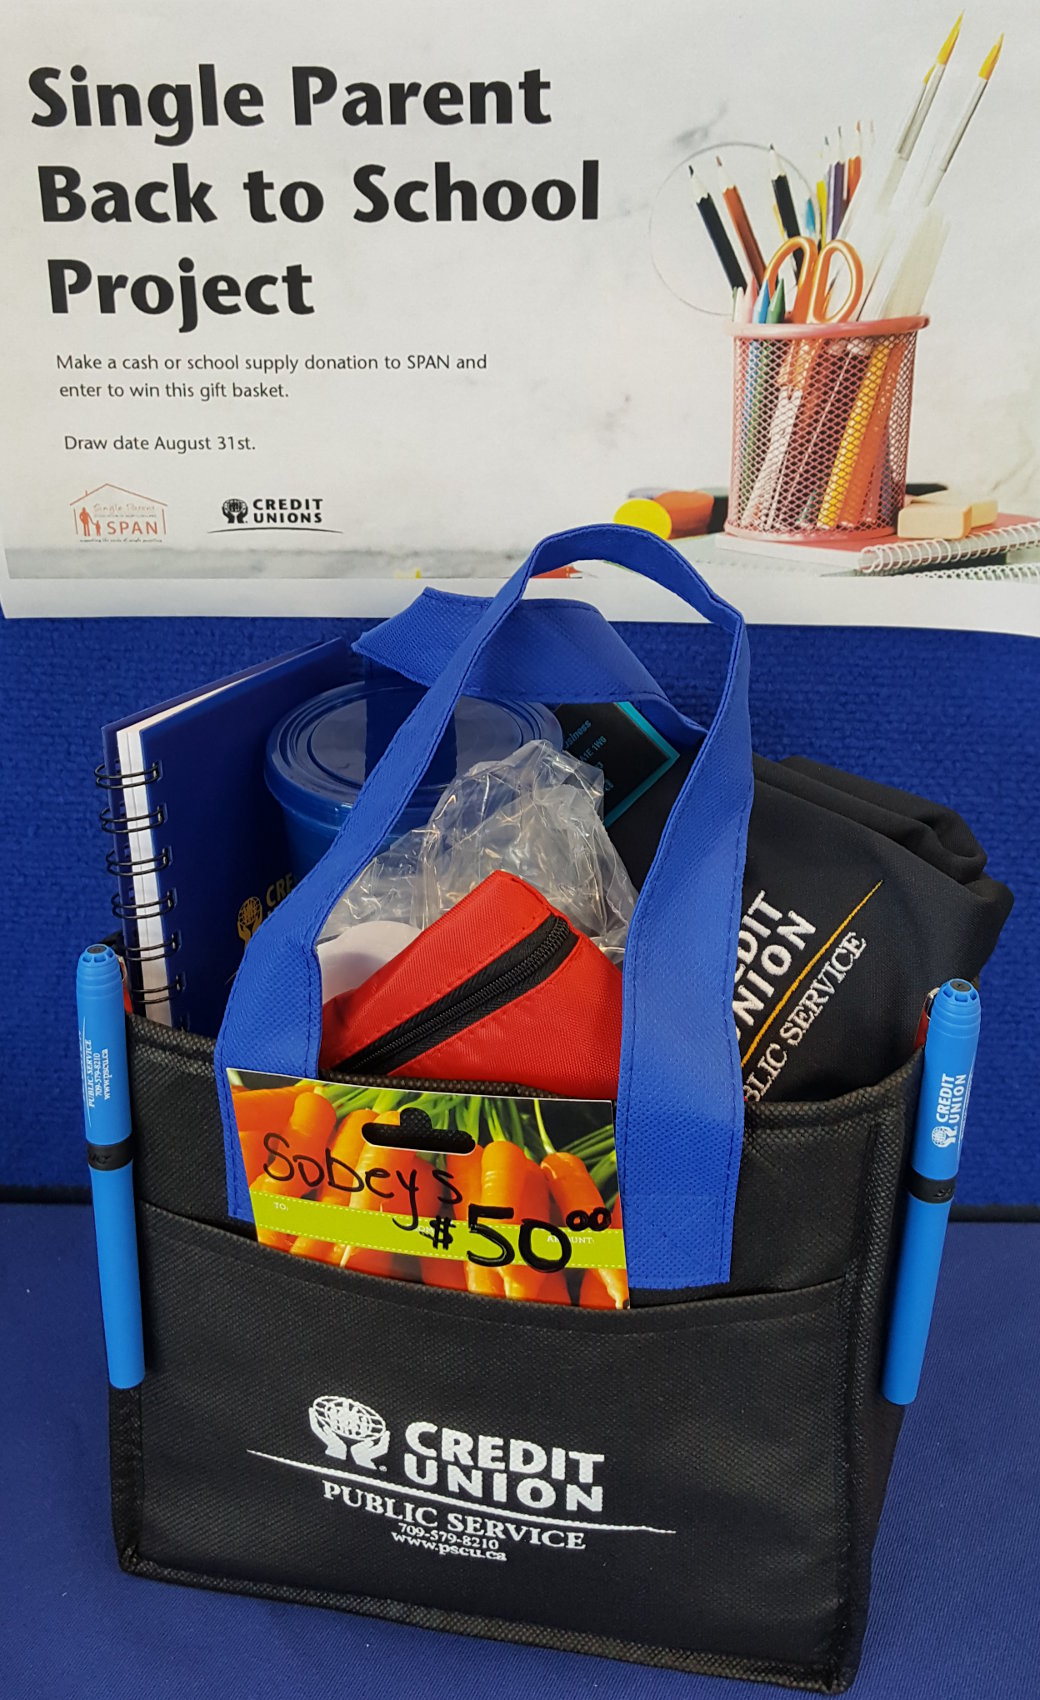 PSCU SPAN Prize Pack. The prize consists of a $50.00 Sobeys gift card, PSCU lunch bag, Ladies golf shirt, tumbler, hardcover note book and pens, ear buds, desk calendar and a mini travel first aid kit.